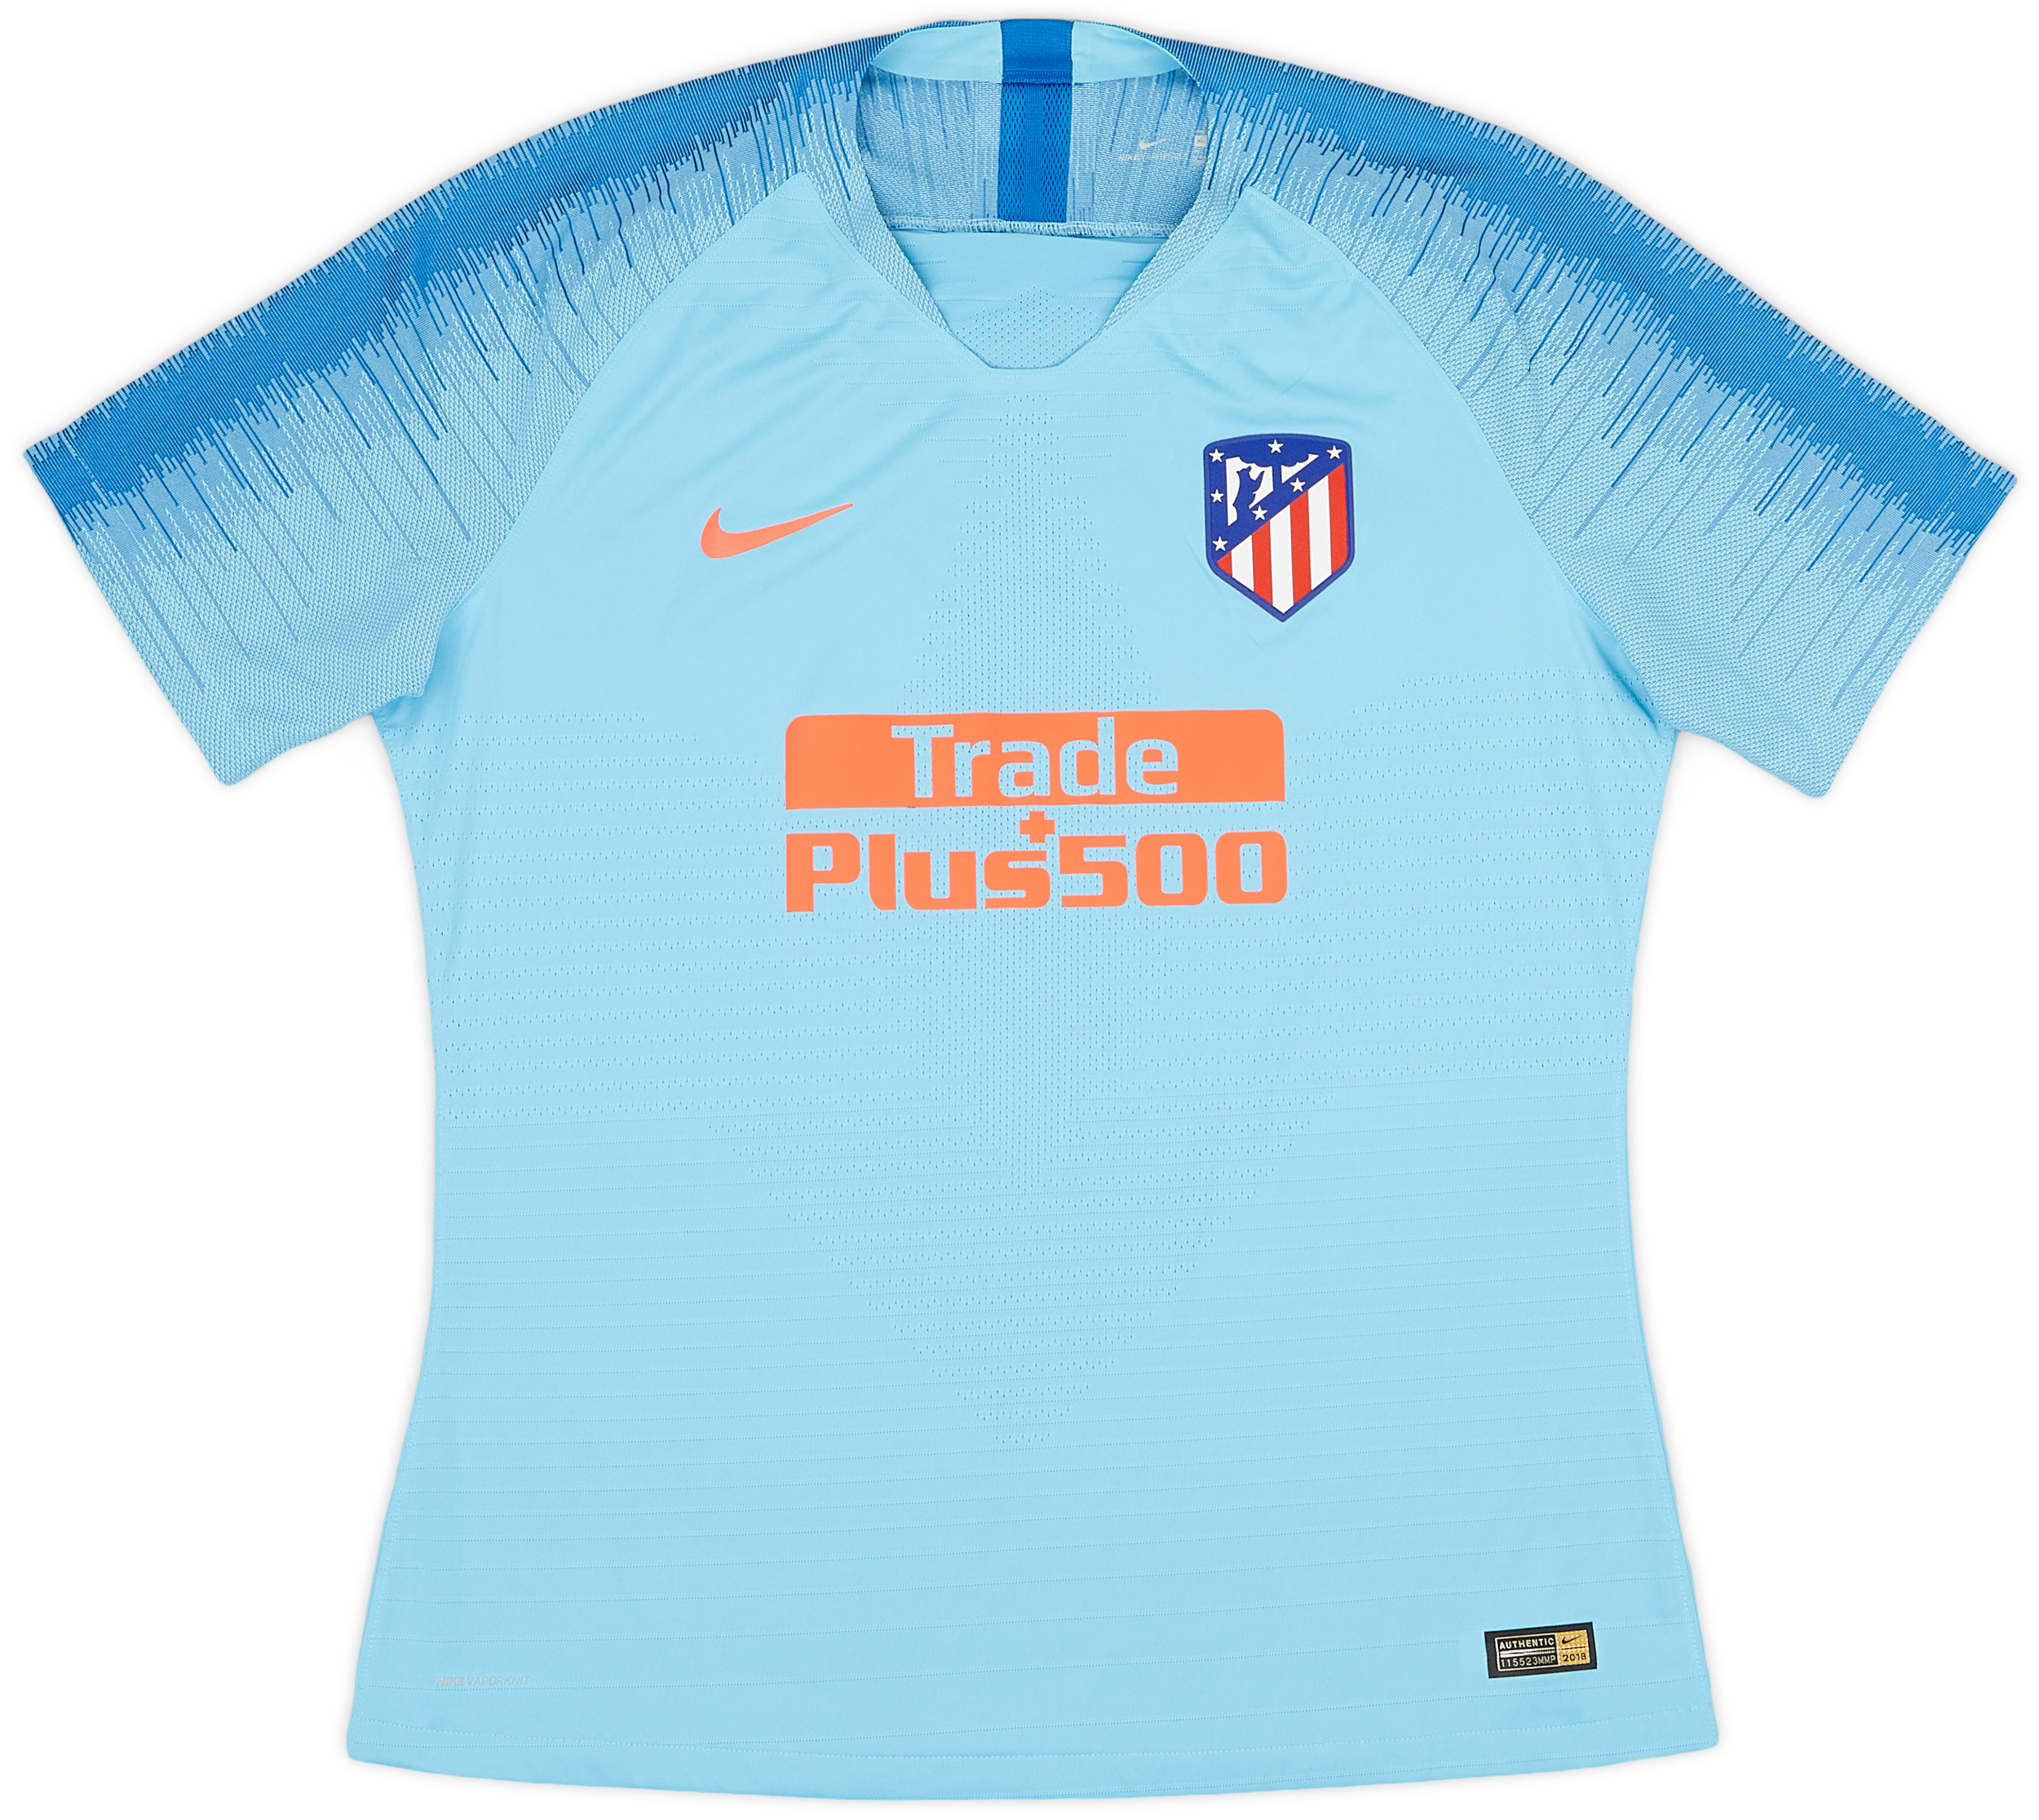 2018-19 Atletico Madrid Authentic Away Shirt - 8/10 - ()